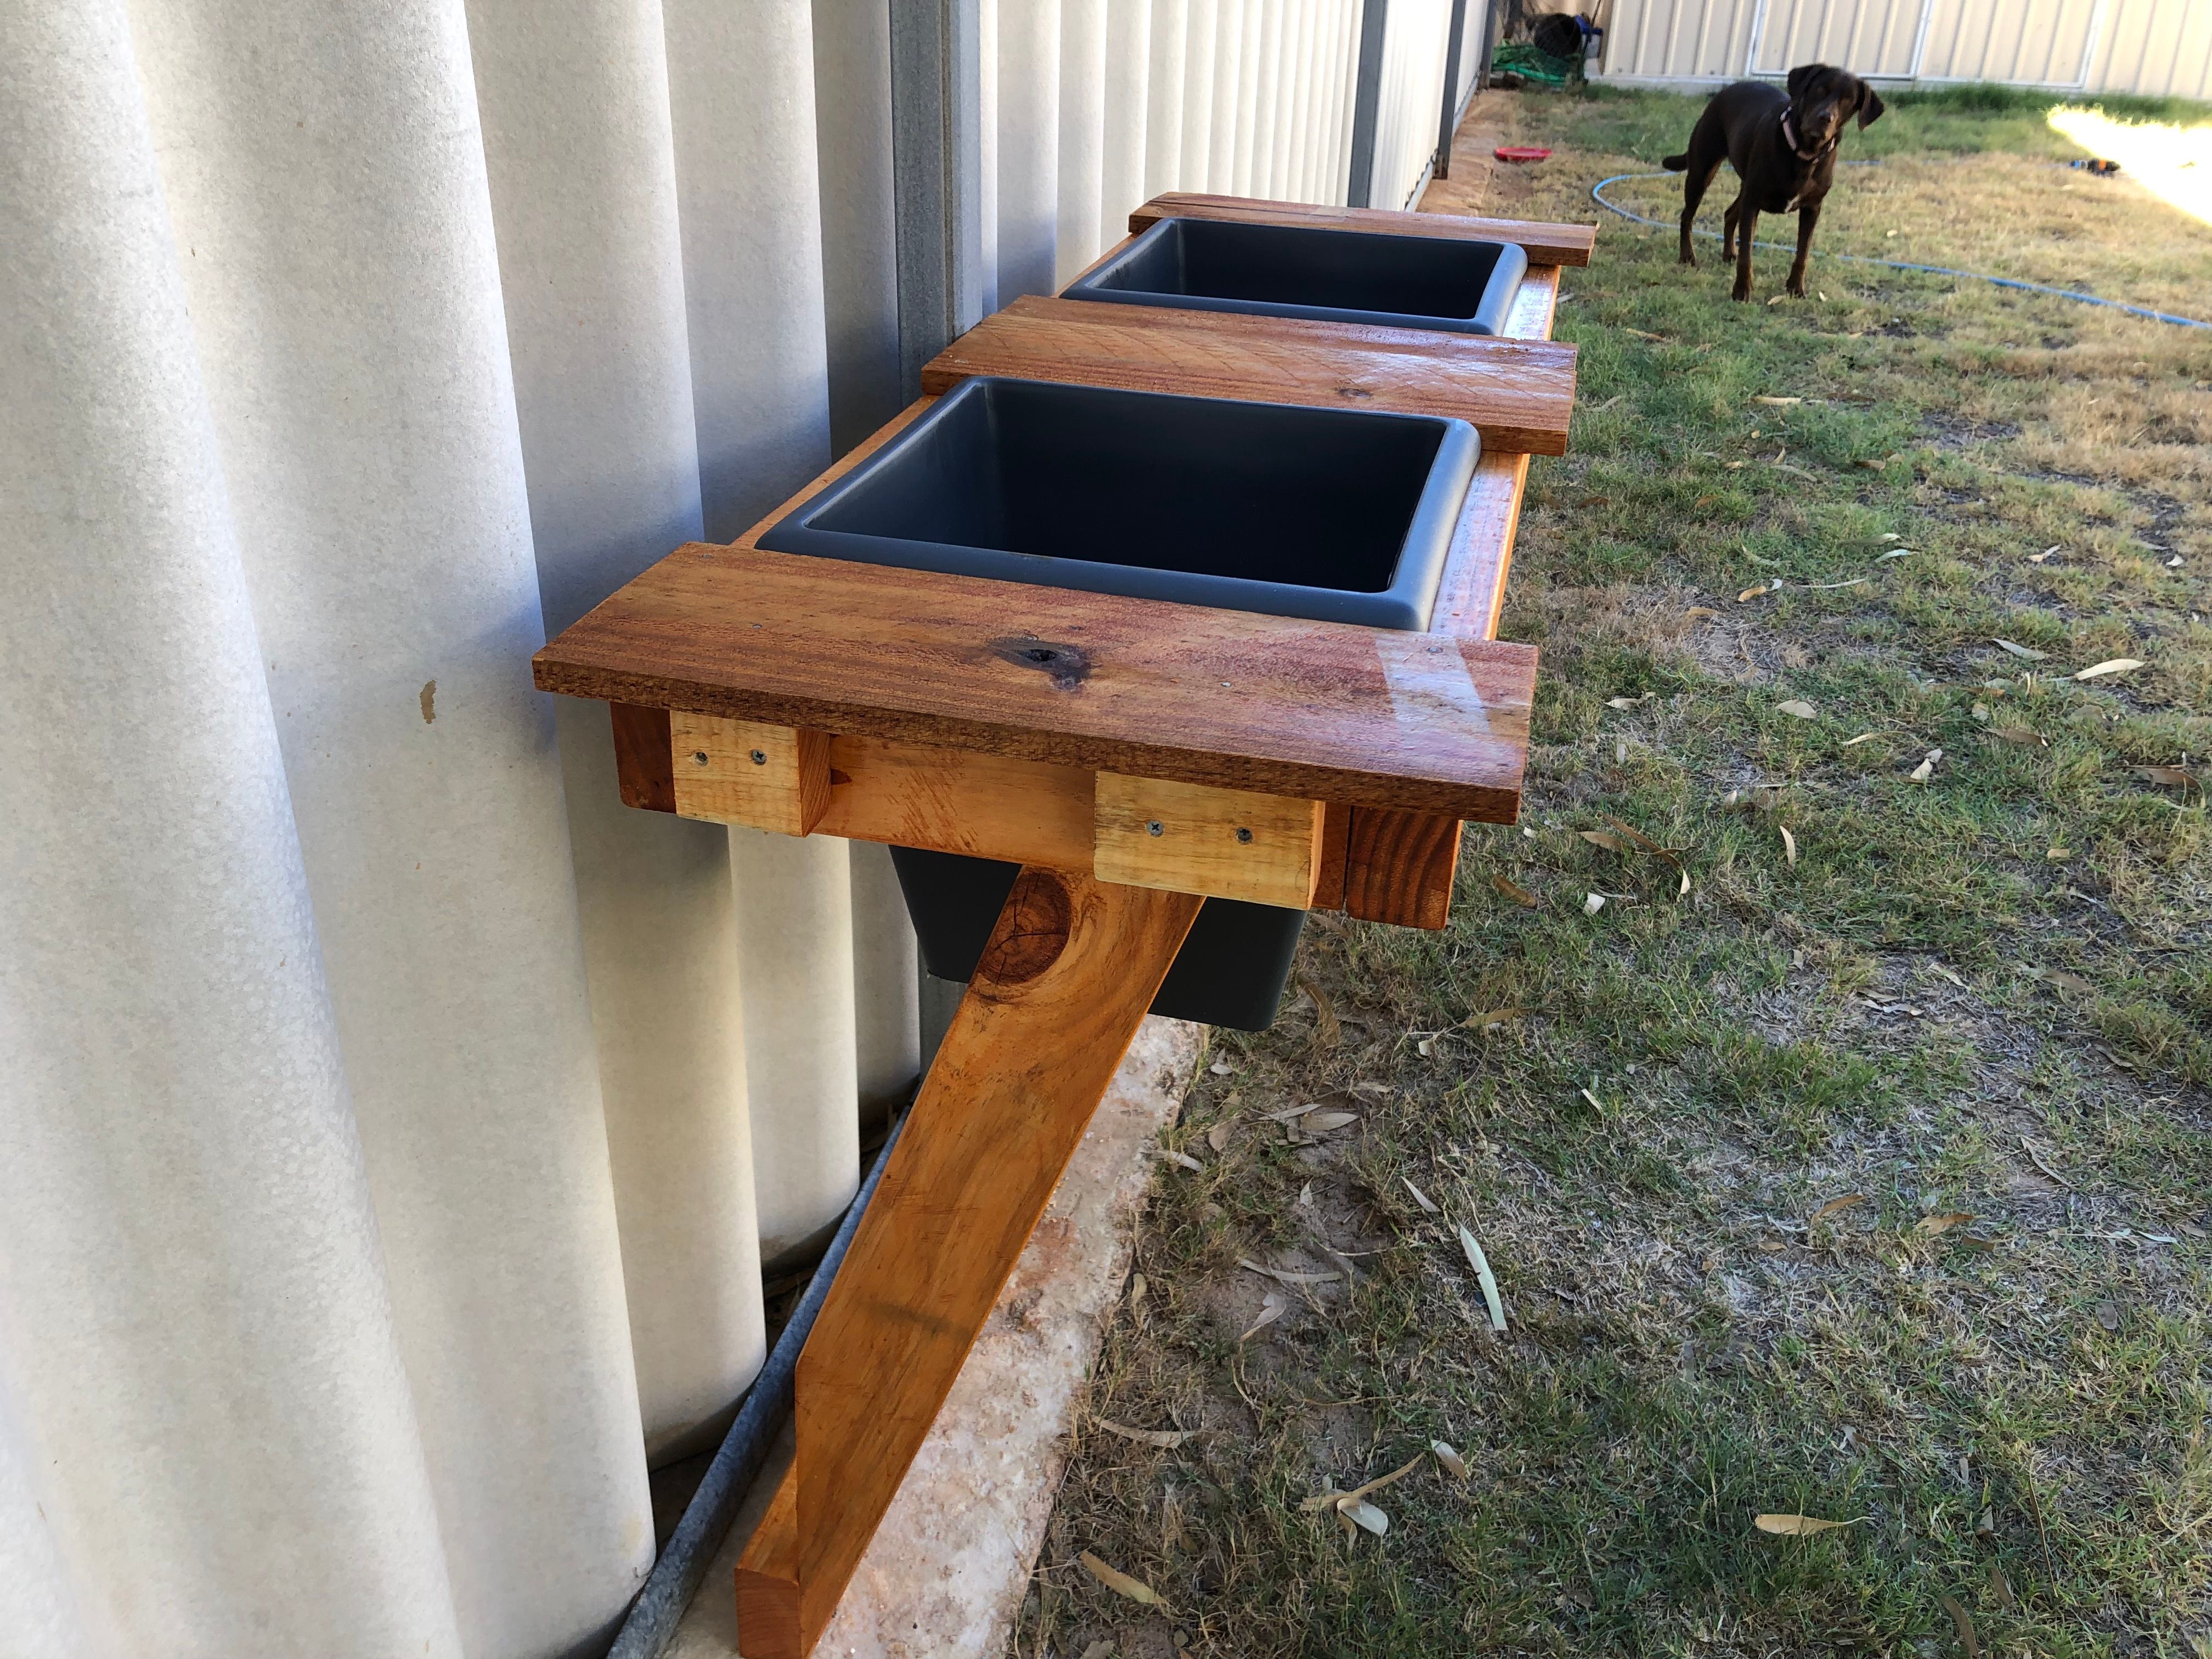 Planter boxes using recycled pallets Bunnings Workshop community